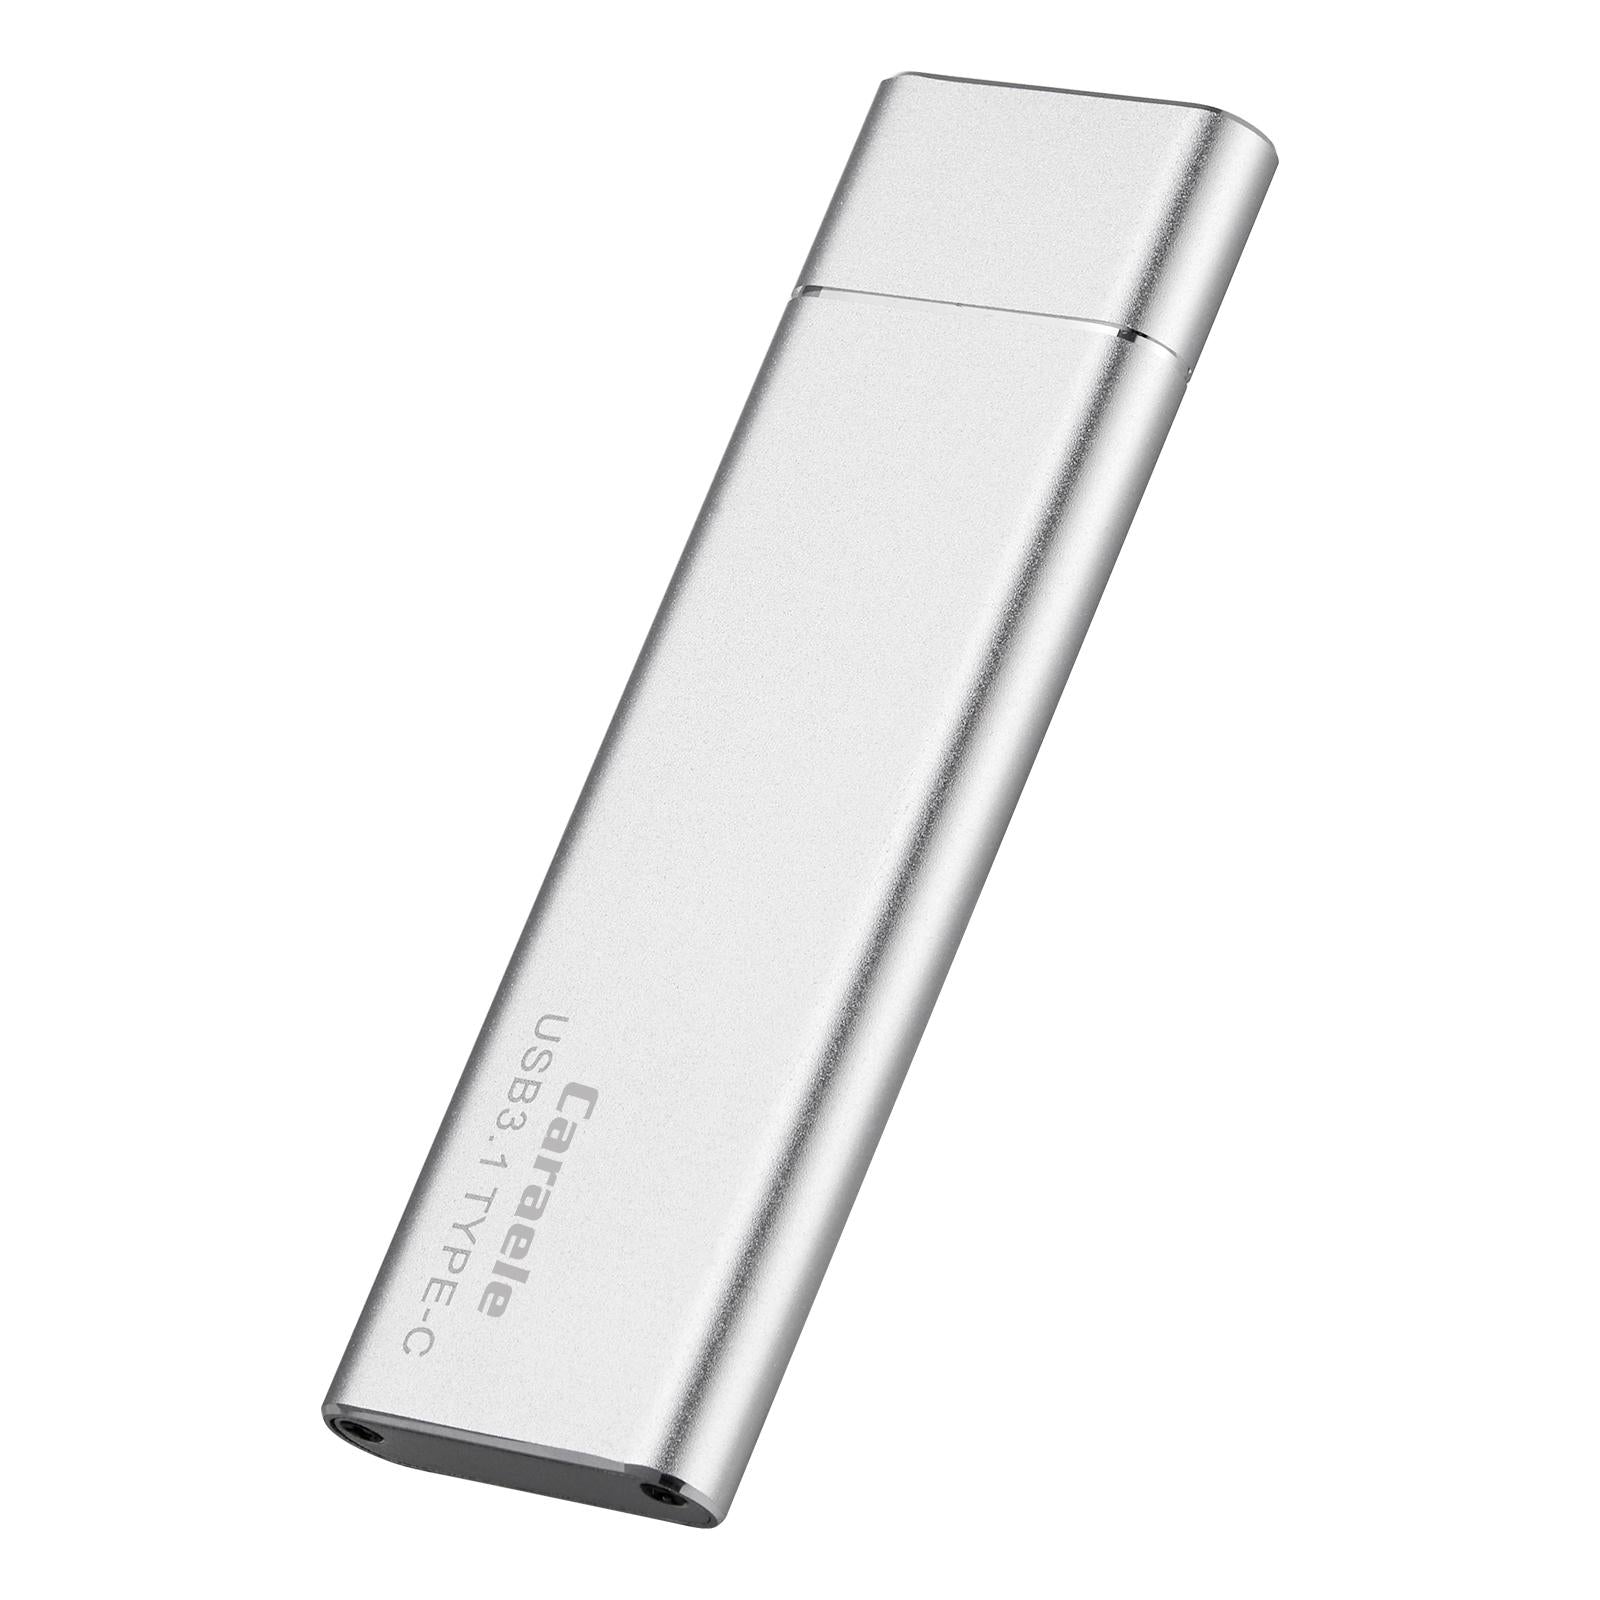 Portable 2TB External SSD Solid State Drive Typc C USB3.1 Compact Silver